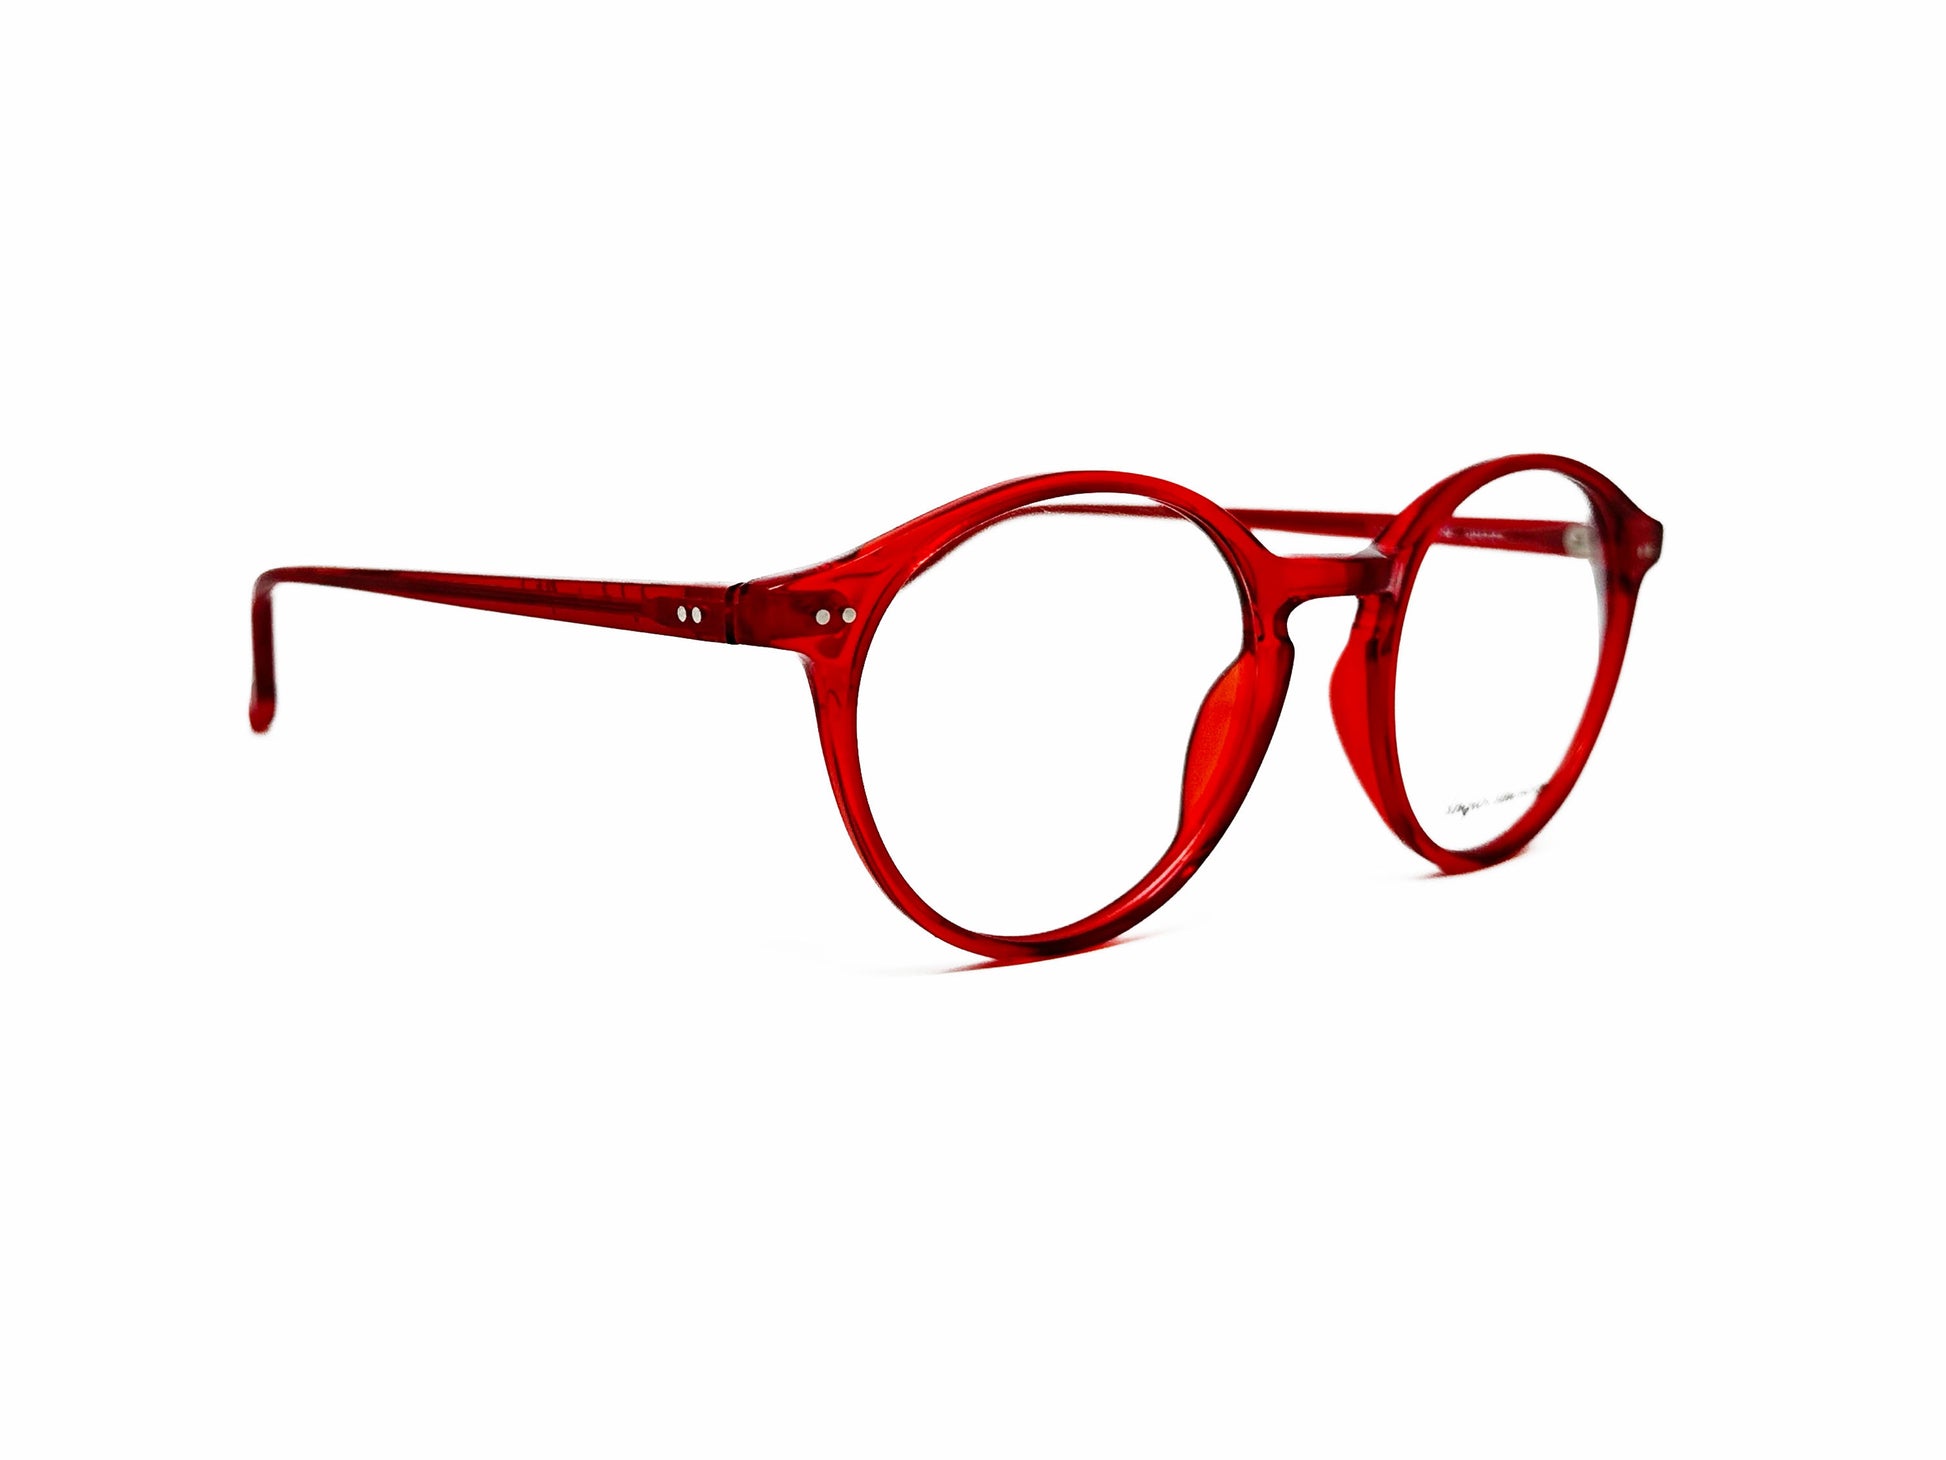 Anglo American Optical round acetate frame. Model: 406. Color: OP9 red. Side view.